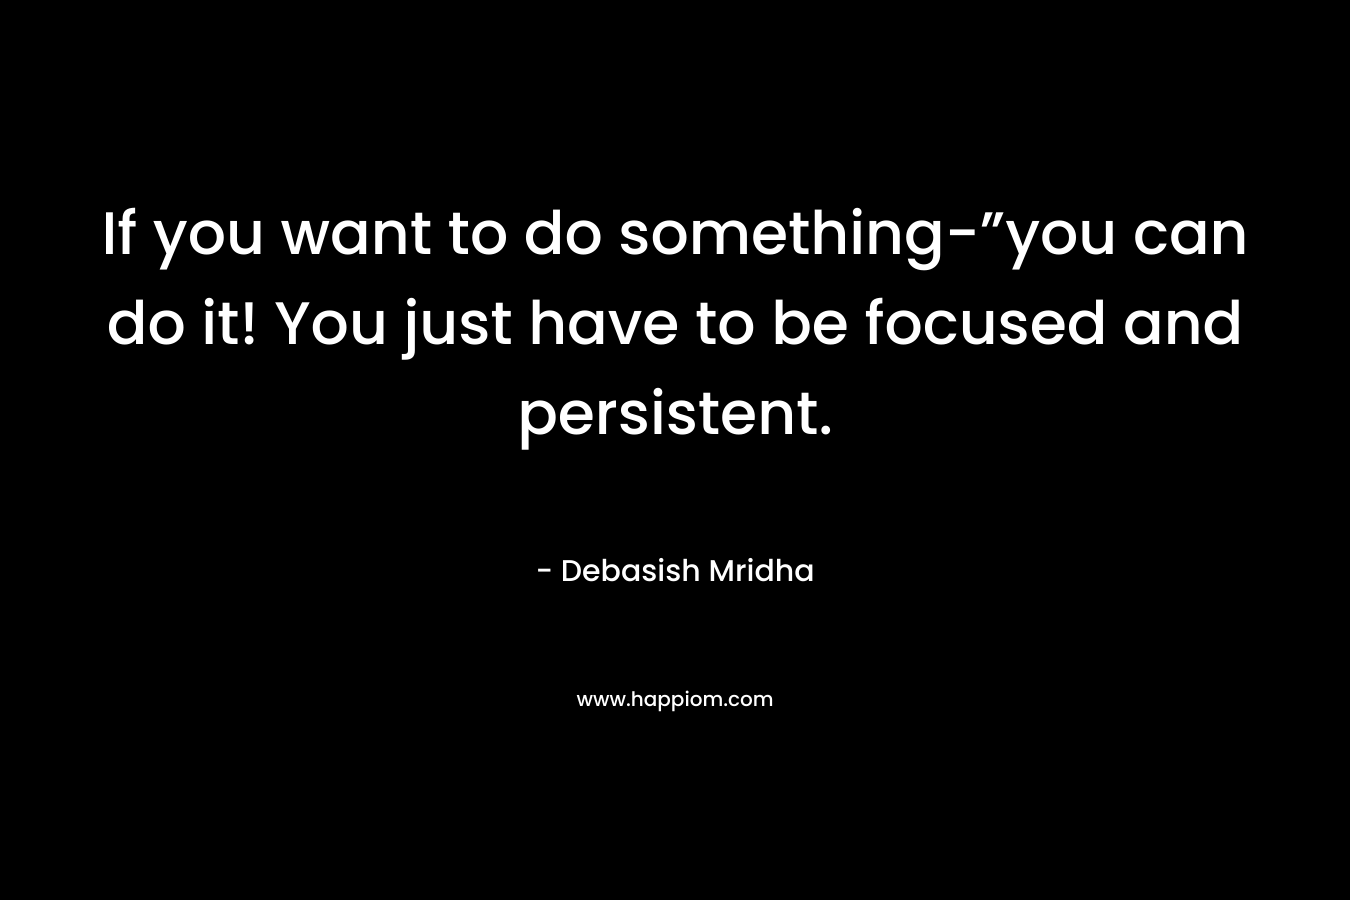 If you want to do something-”you can do it! You just have to be focused and persistent.